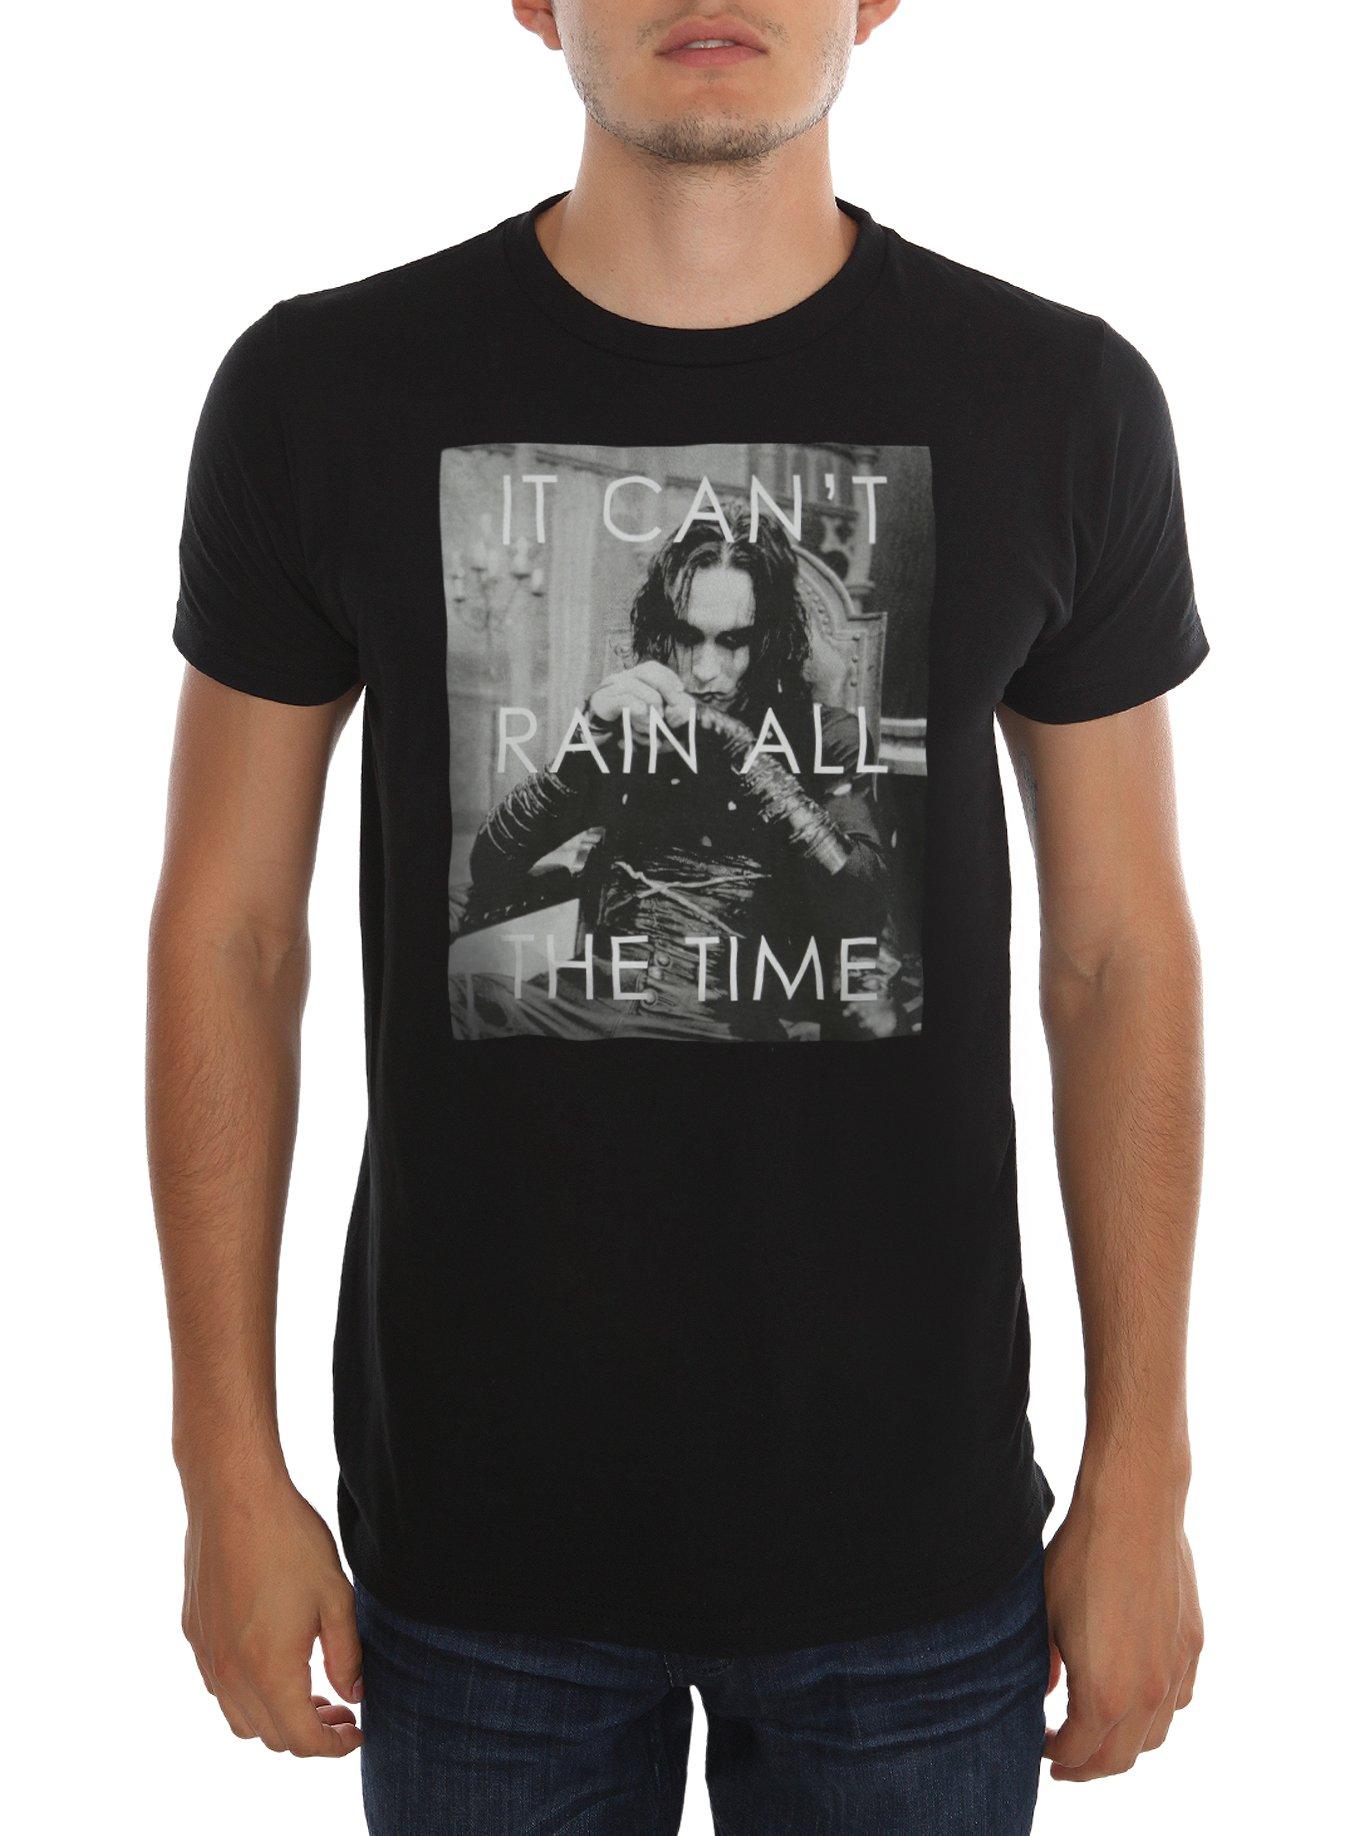 The Crow It Can't Rain All The Time T-Shirt, BLACK, hi-res